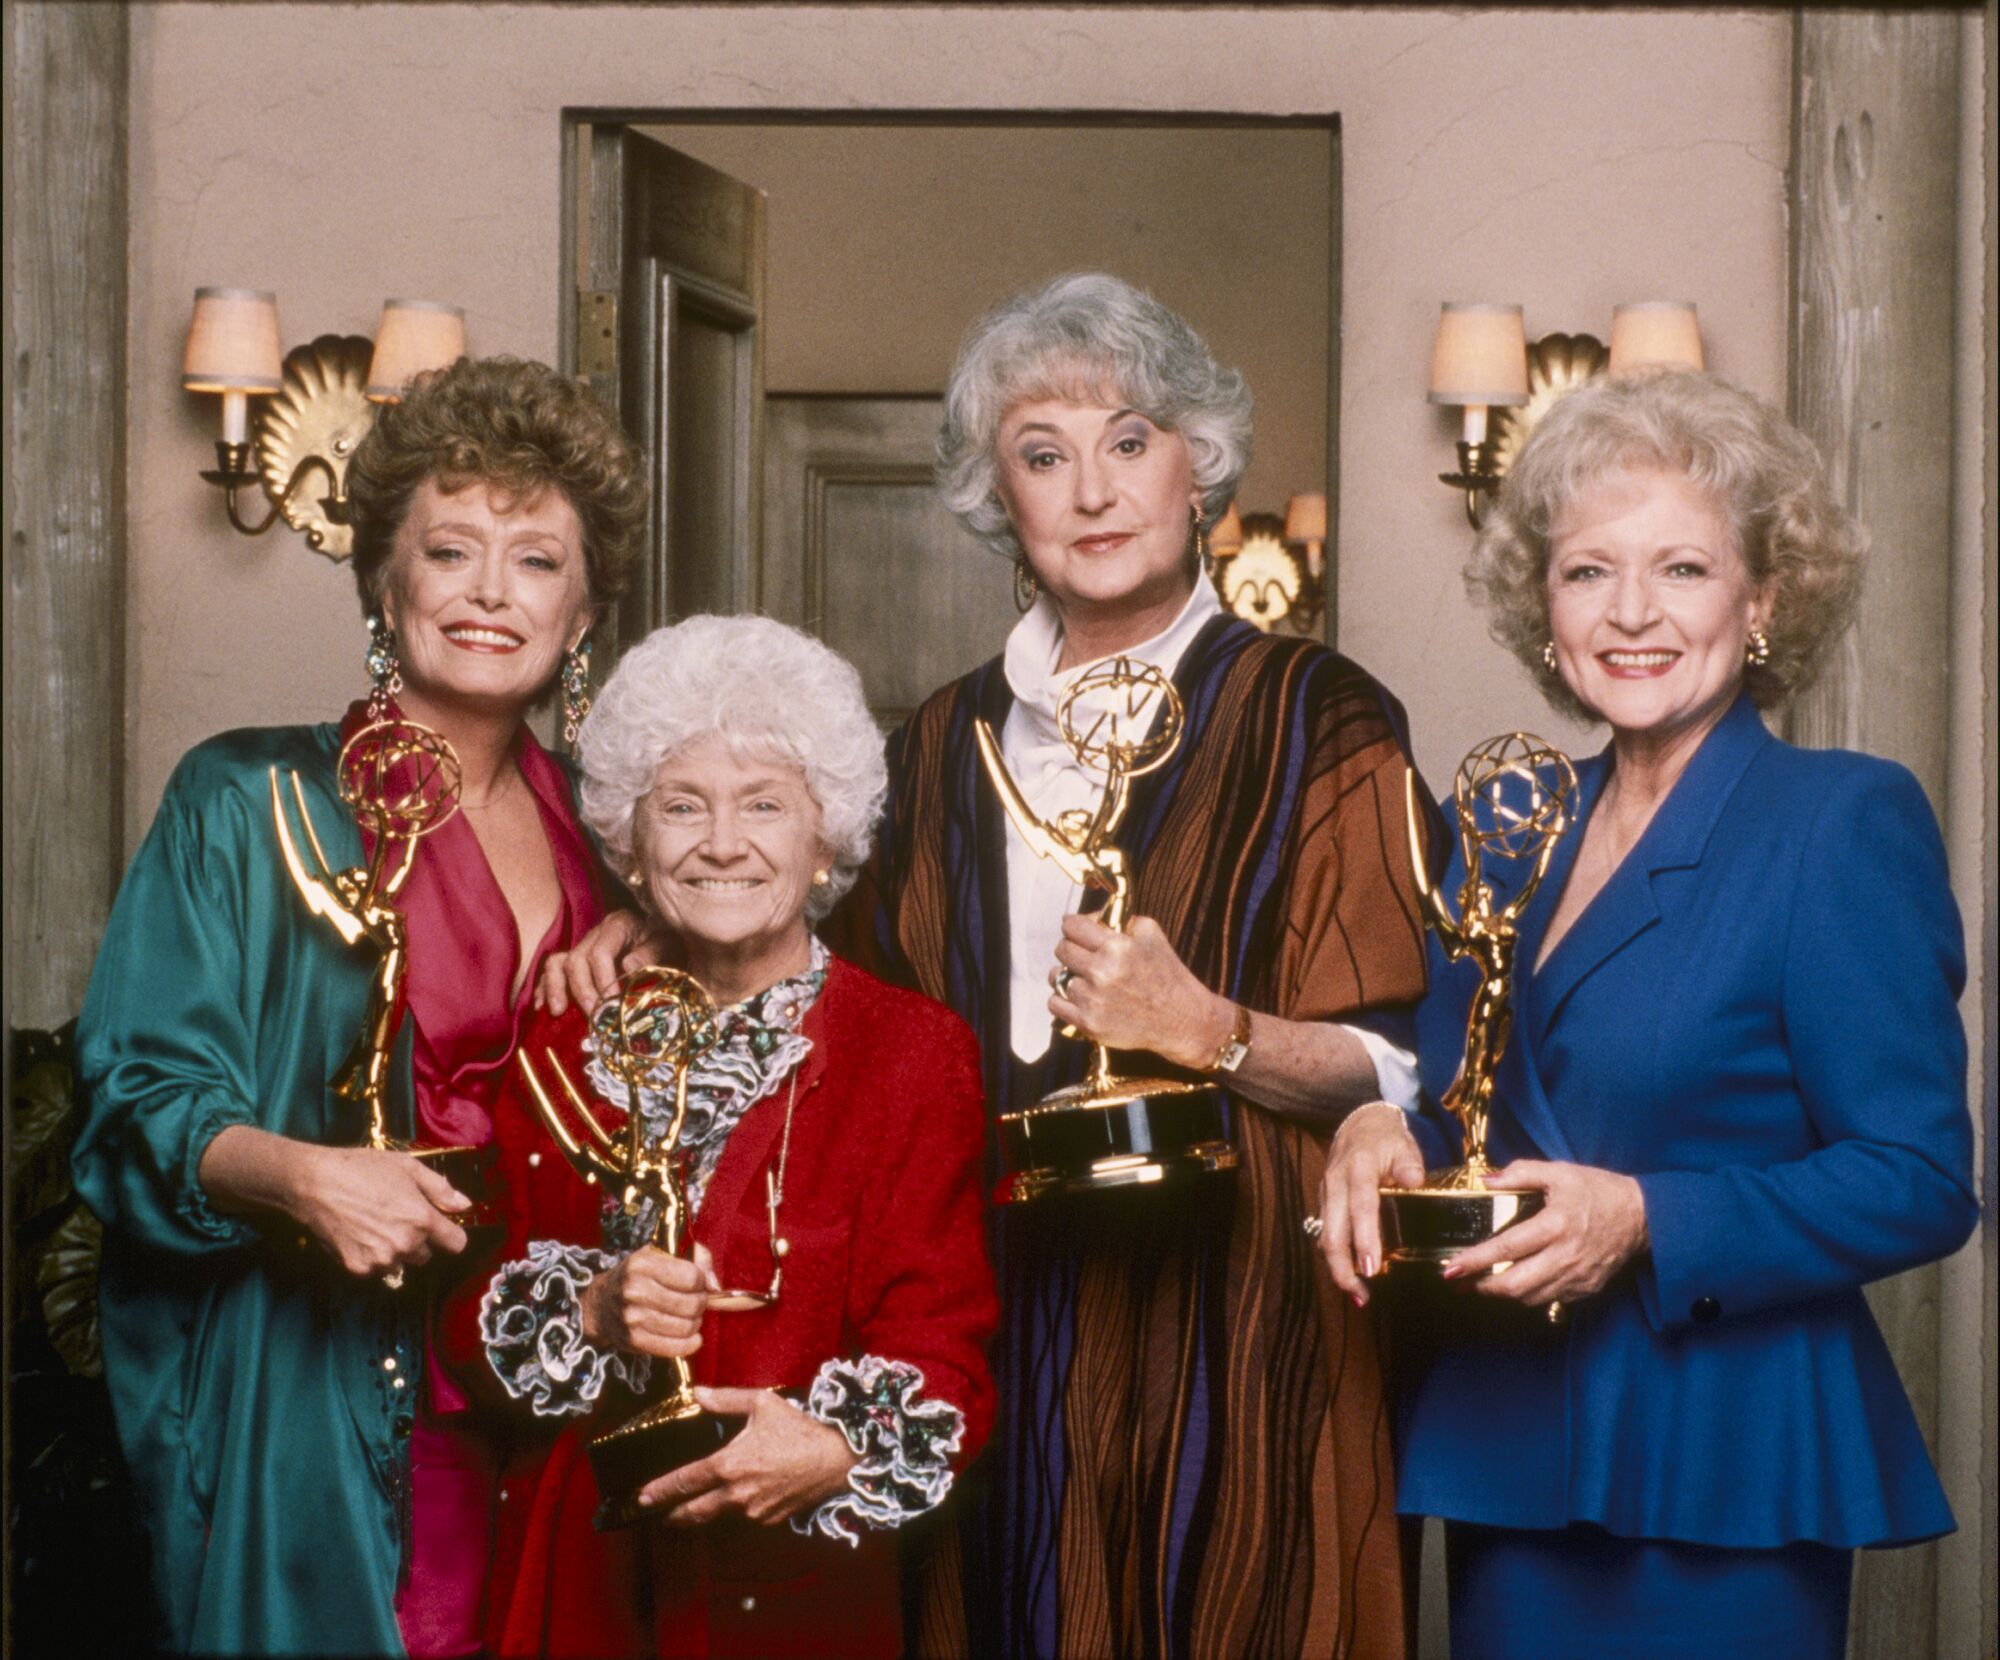 "The Golden Girls" cast: Rue McClanahan, Estelle Getty, Bea Arthur and Betty White